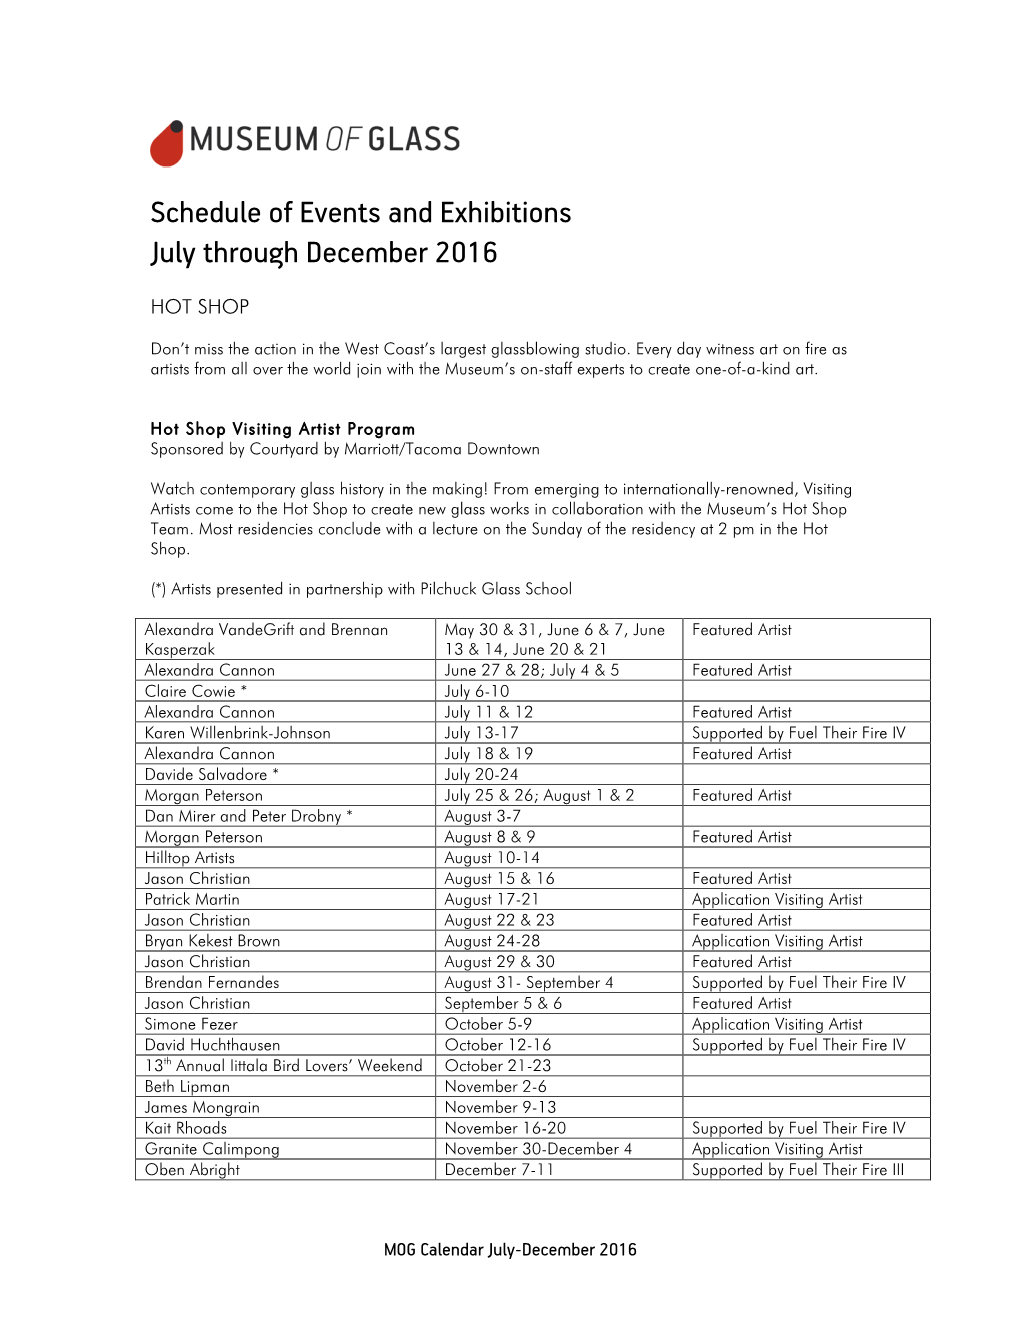 Schedule of Events and Exhibitions July Through December 2016